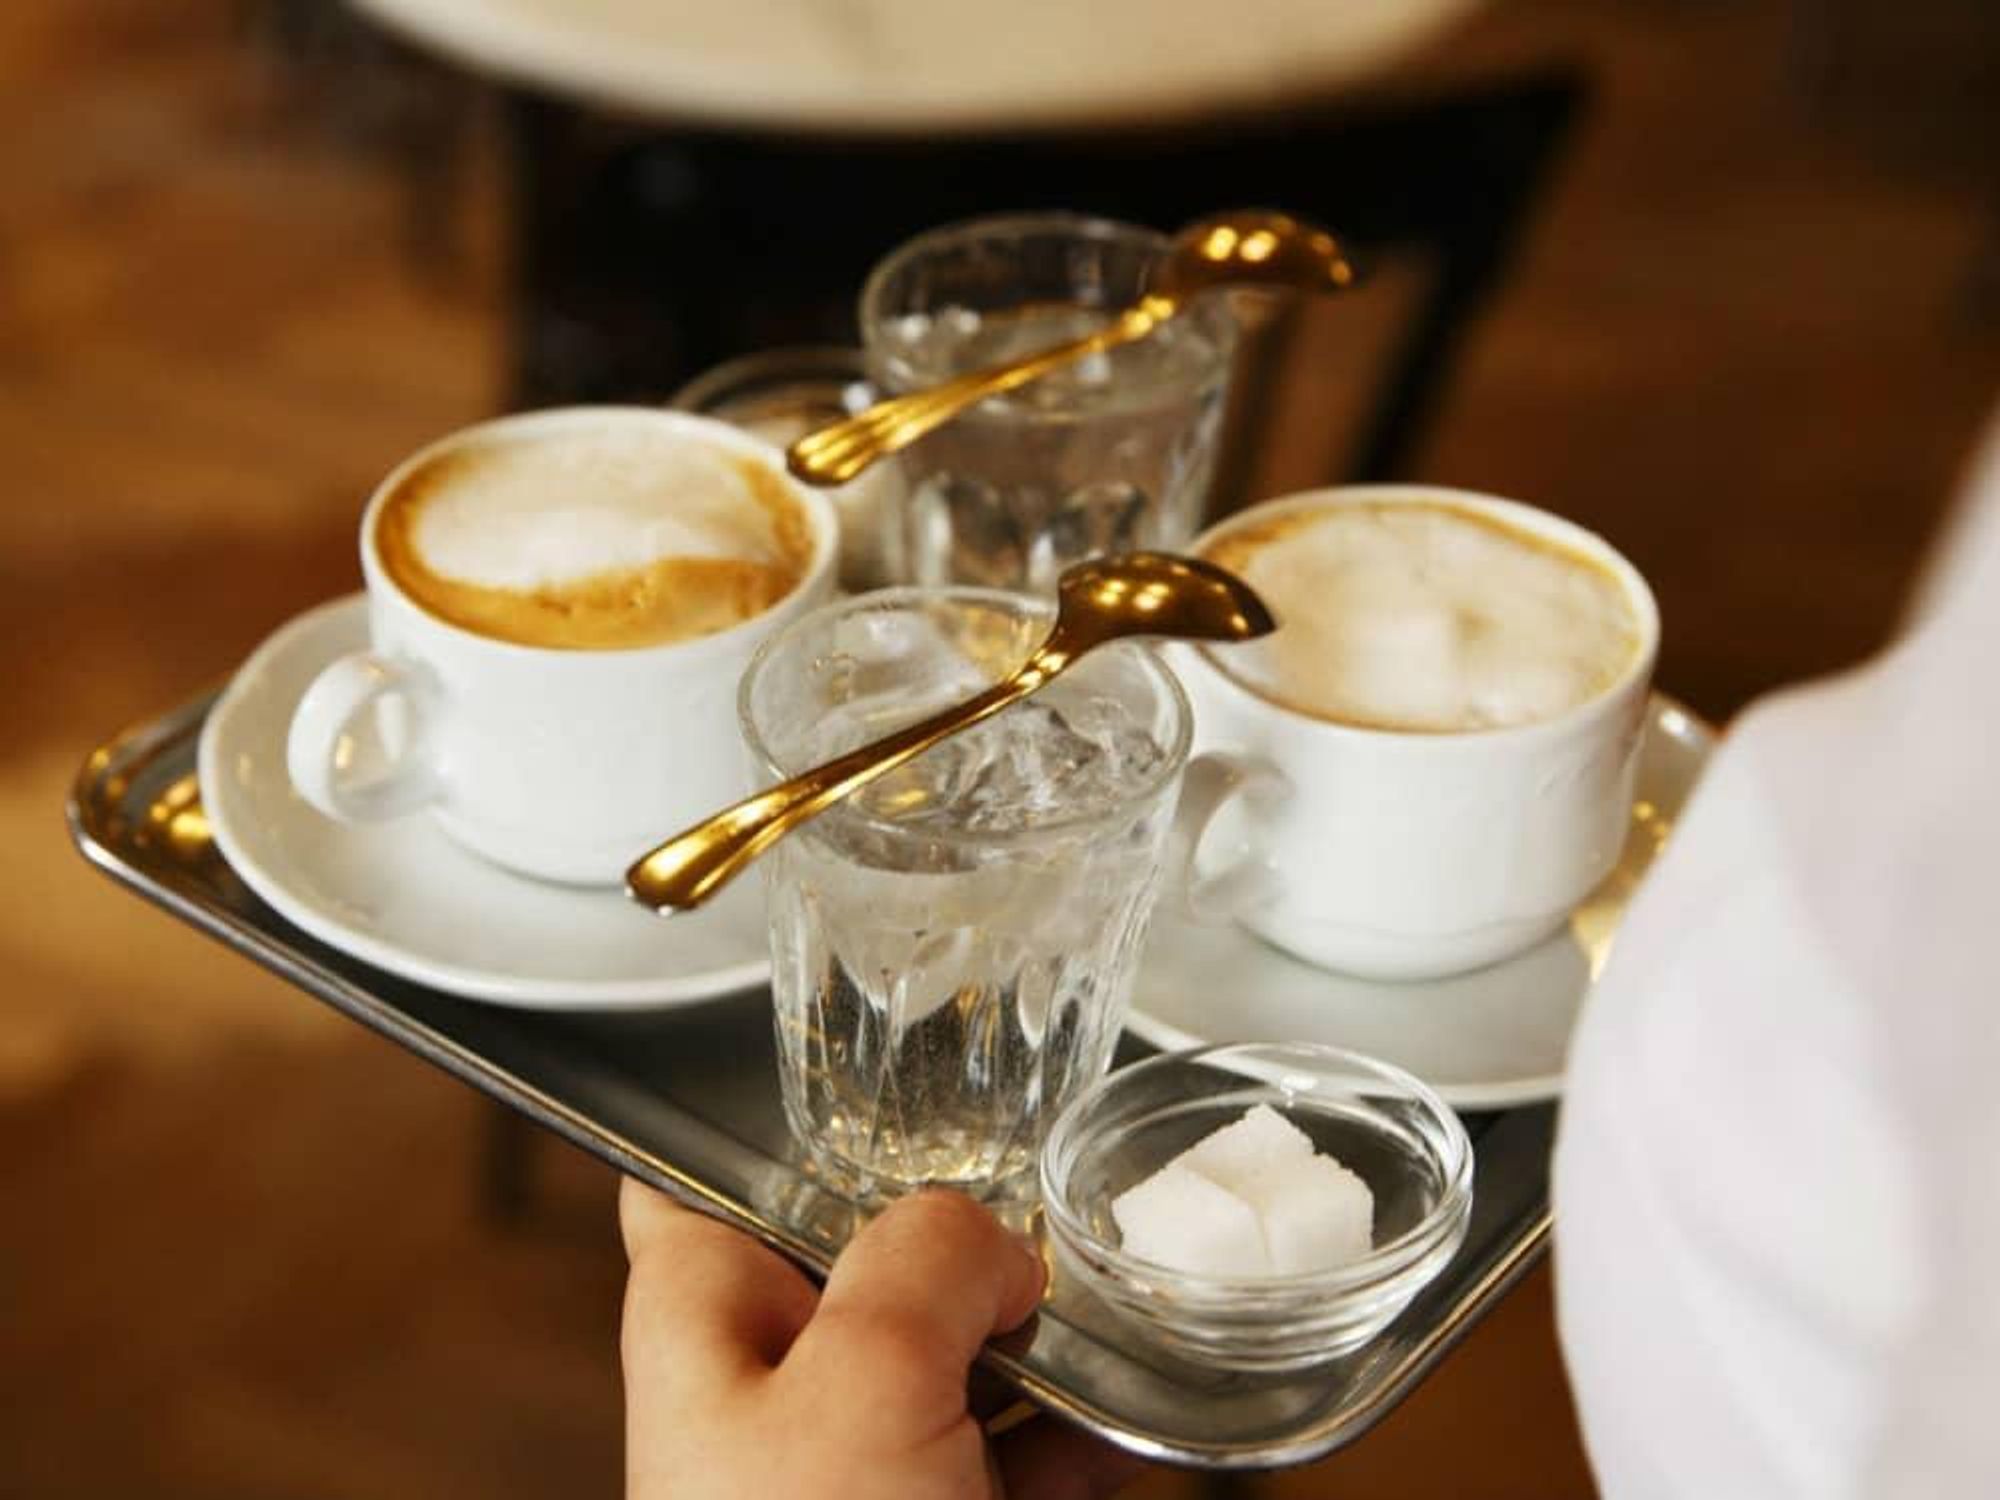 https://dallas.culturemap.com/media-library/viennese-style-coffee.jpg?id=31528337&width=2000&height=1500&quality=85&coordinates=0%2C0%2C0%2C0